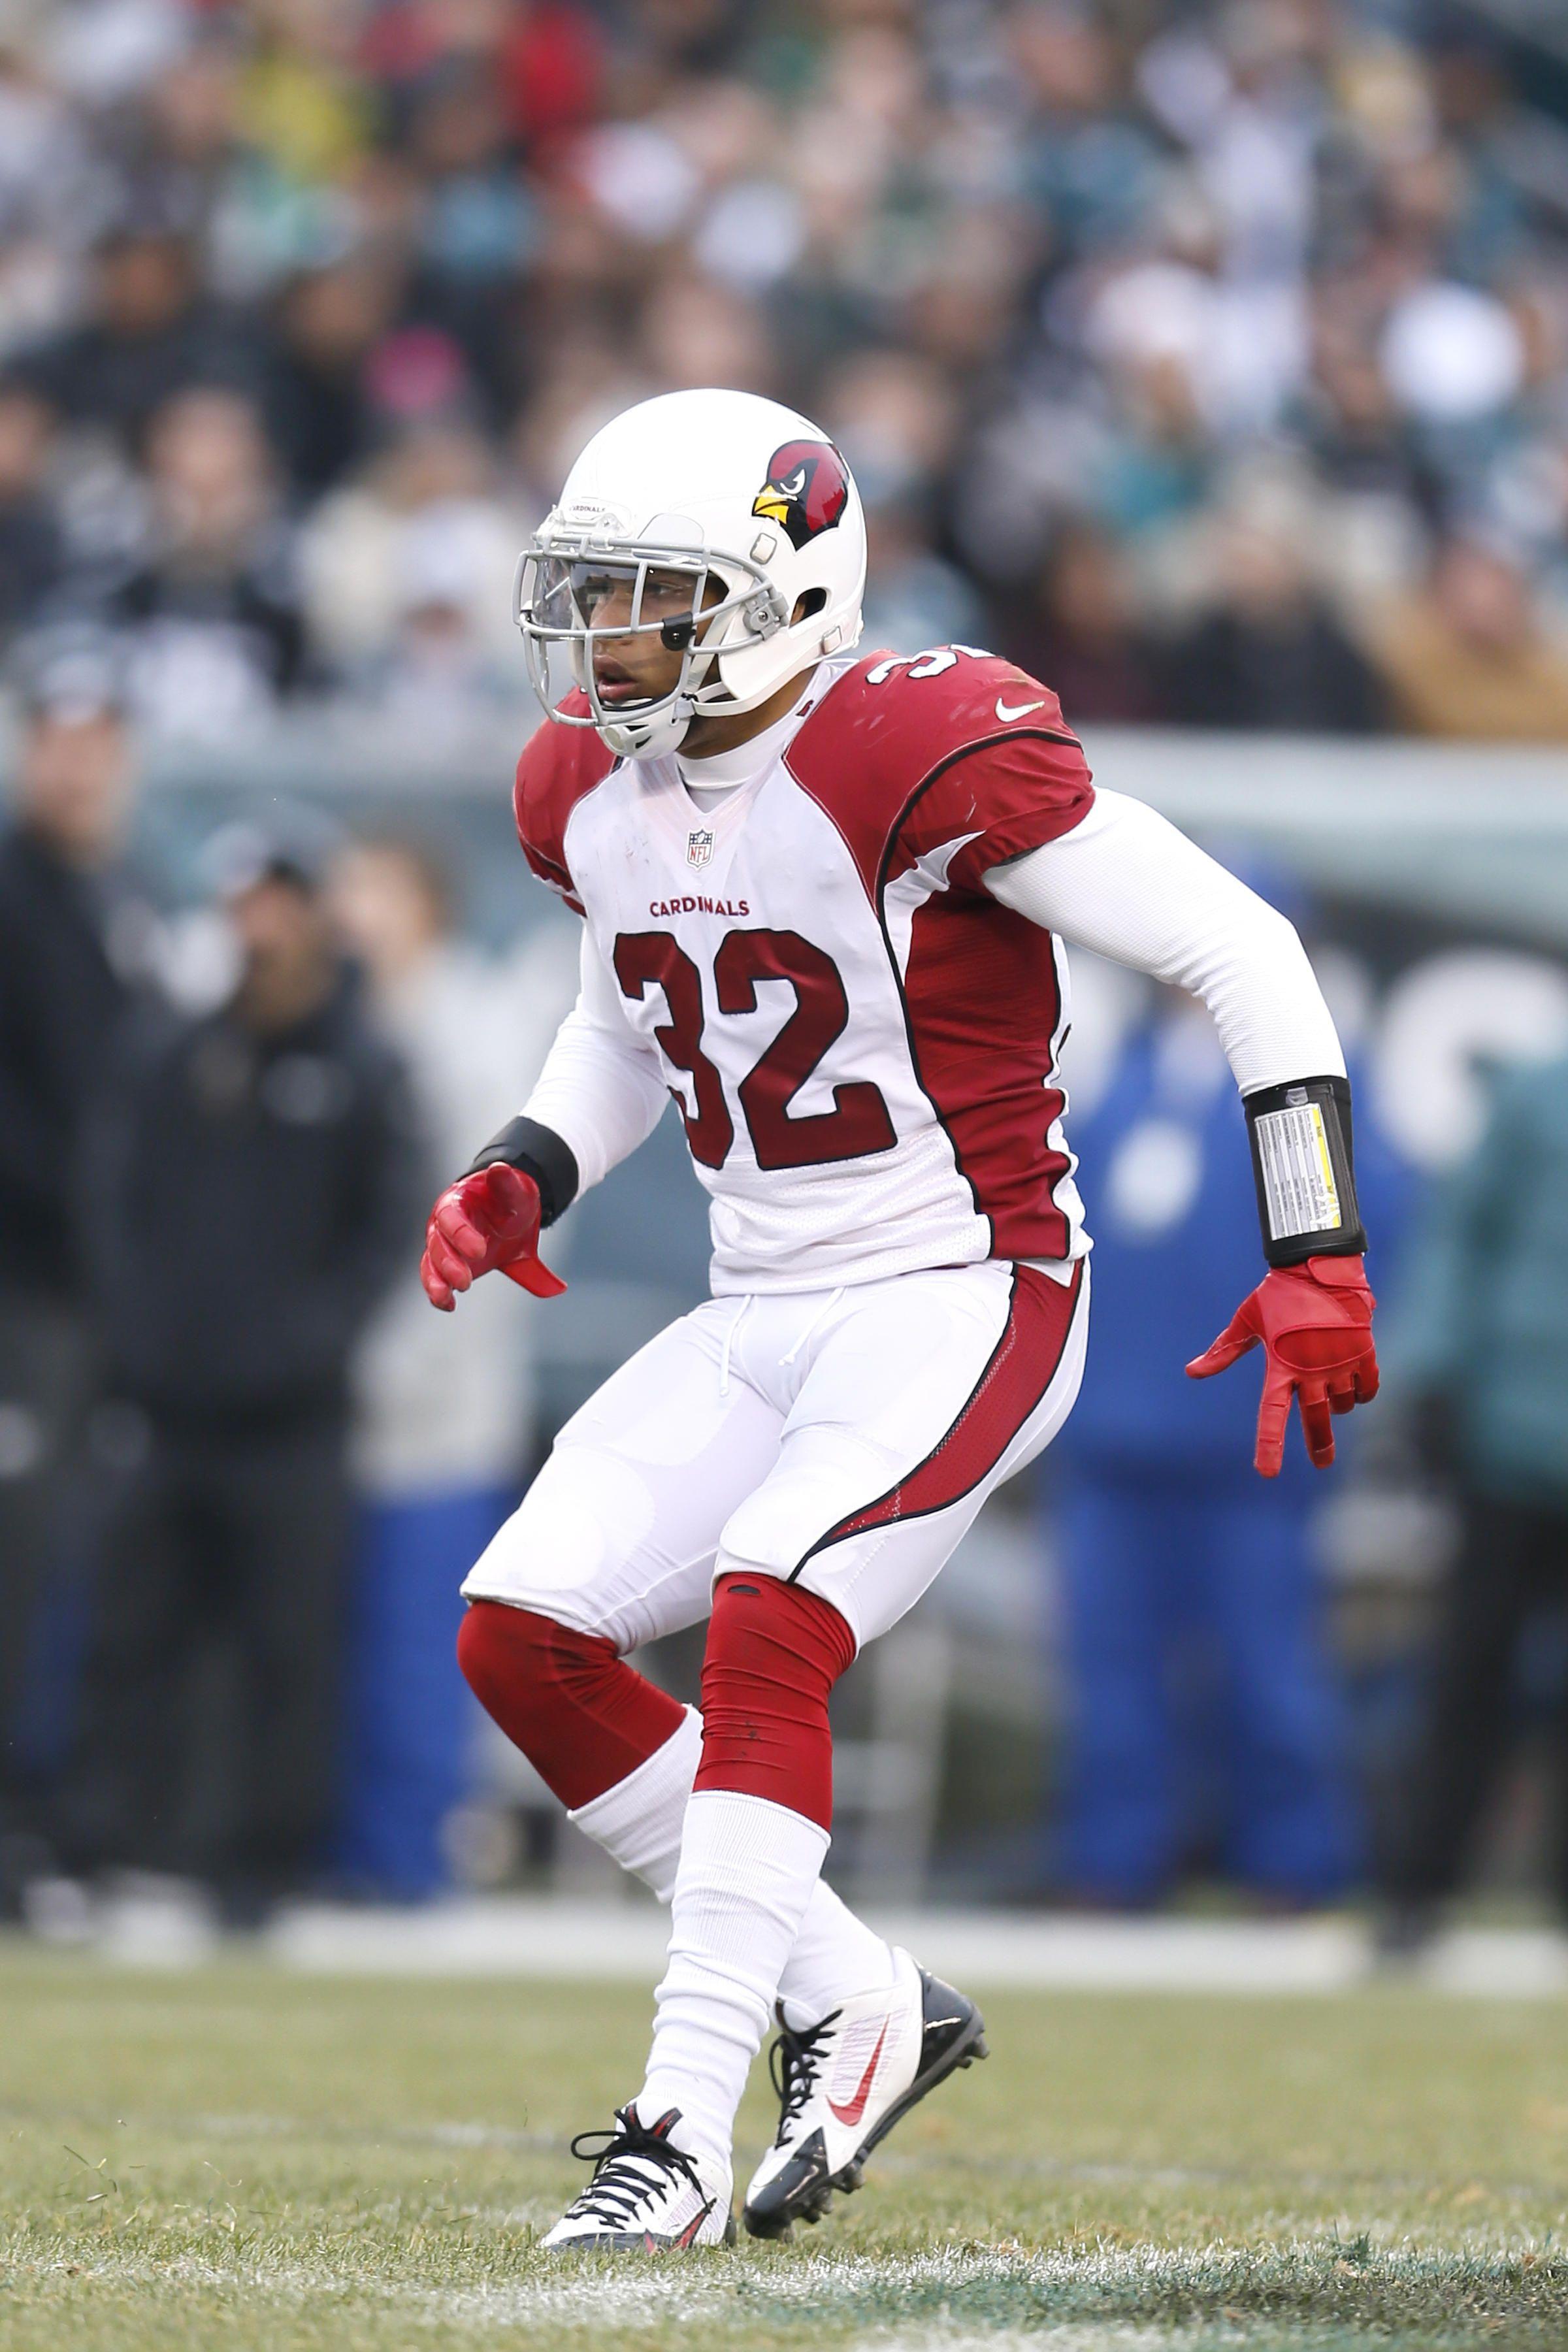 Know Your Opponent: Arizona Cardinals. Los Angeles Chargers